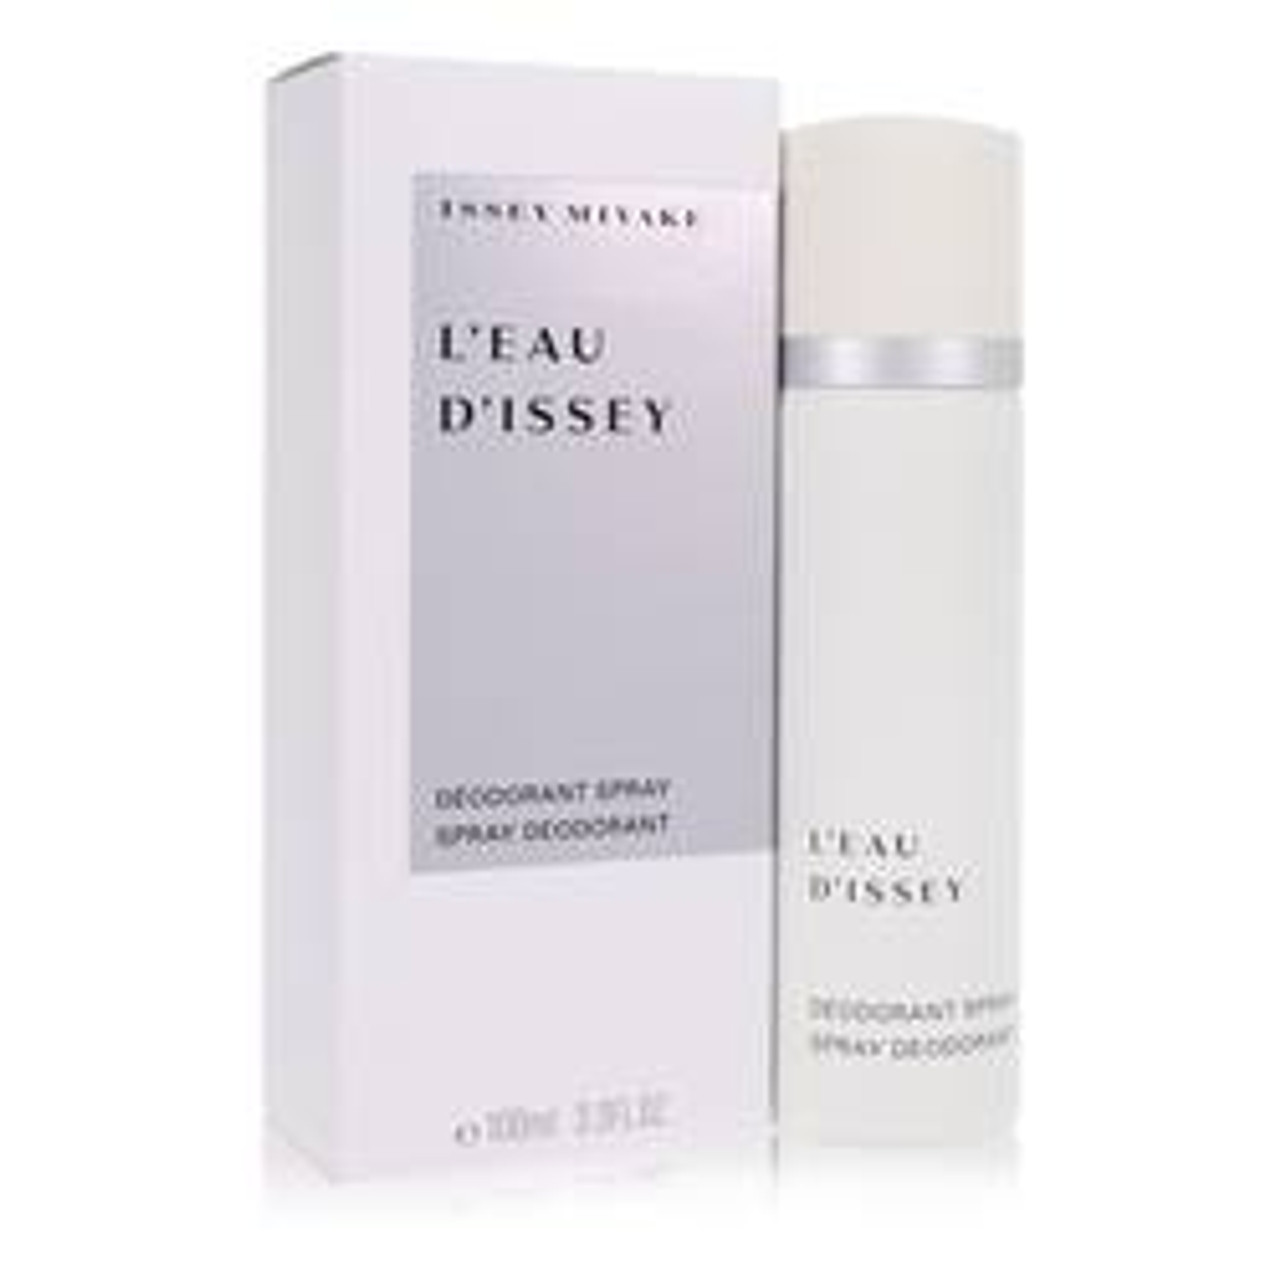 L'eau D'issey (issey Miyake) Perfume By Issey Miyake Deodorant Spray 3.3 oz for Women - [From 116.00 - Choose pk Qty ] - *Ships from Miami